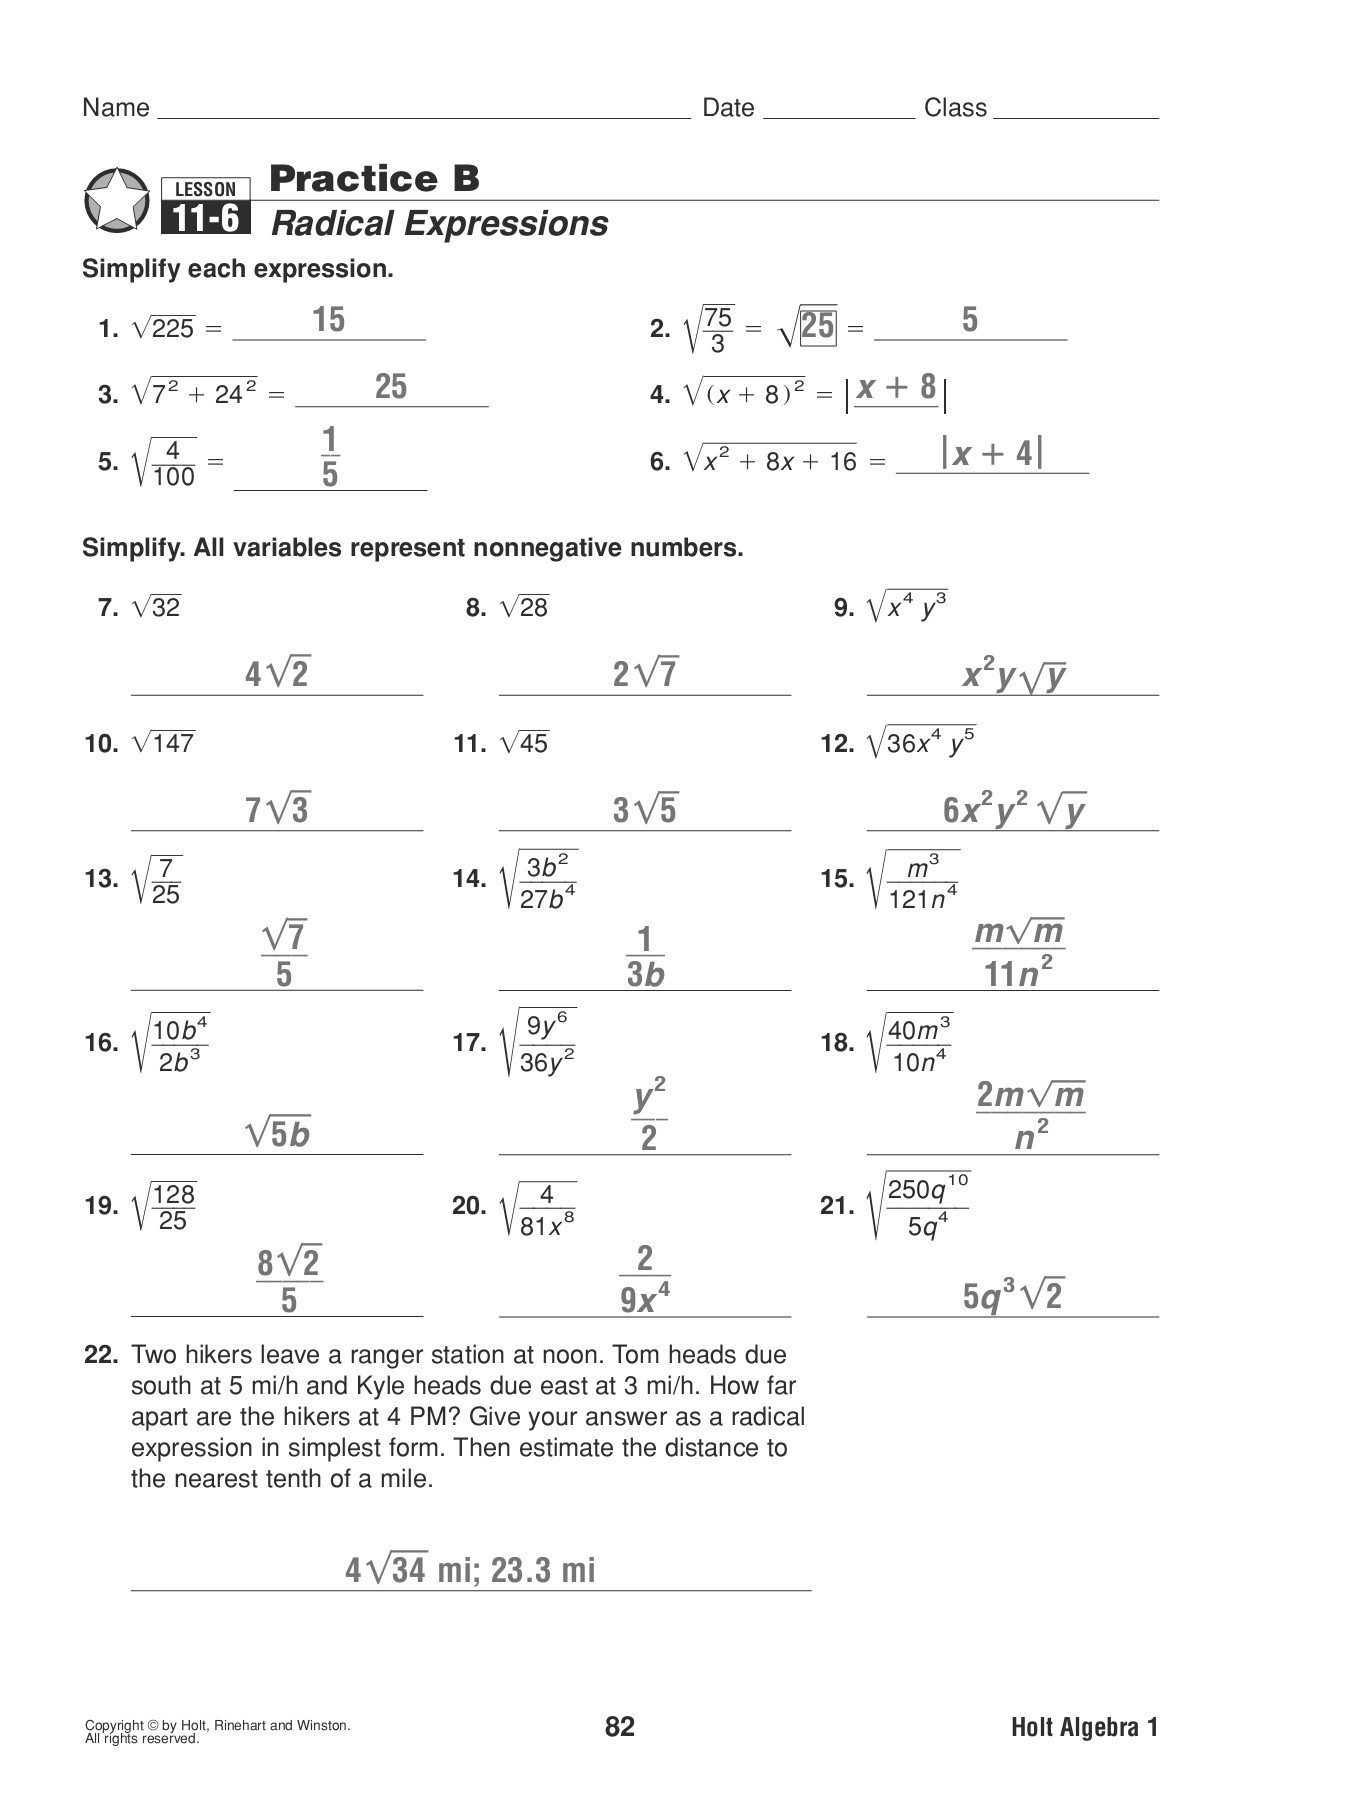 Simplifying Radical Expressions Worksheet Answers Lesson Practice B 11 6 Radical Expressions